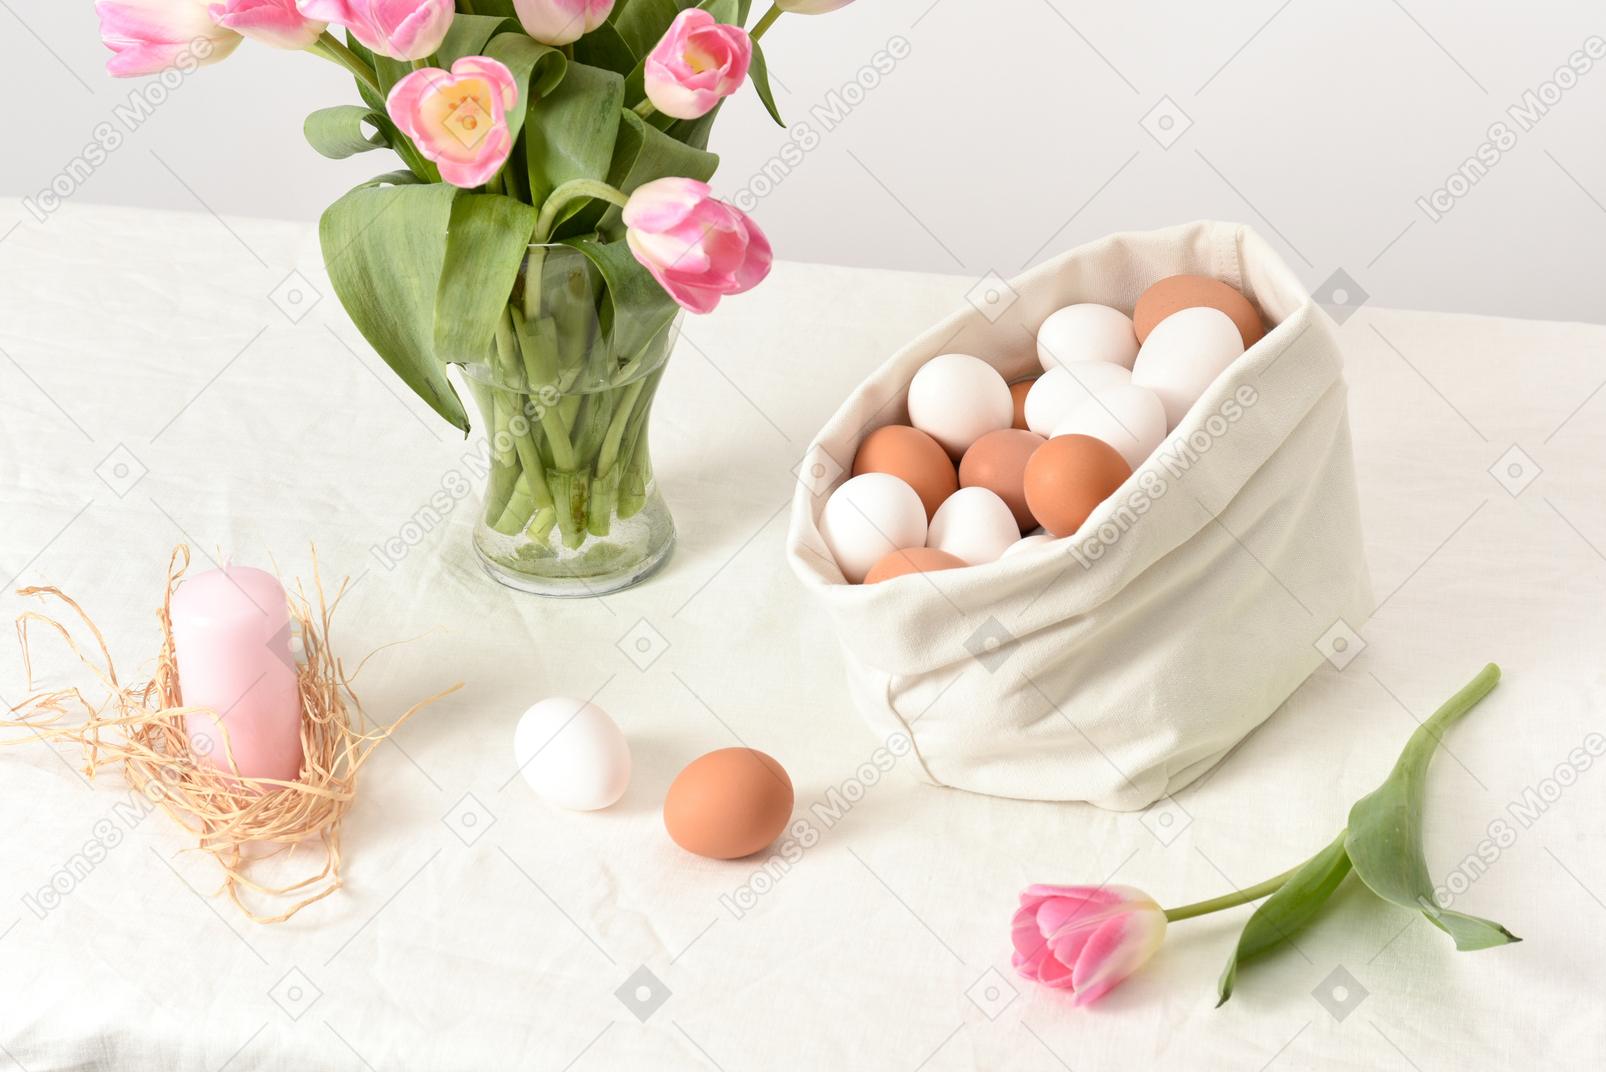 Linen bag with some eggs, a tulip bouquet and a candle